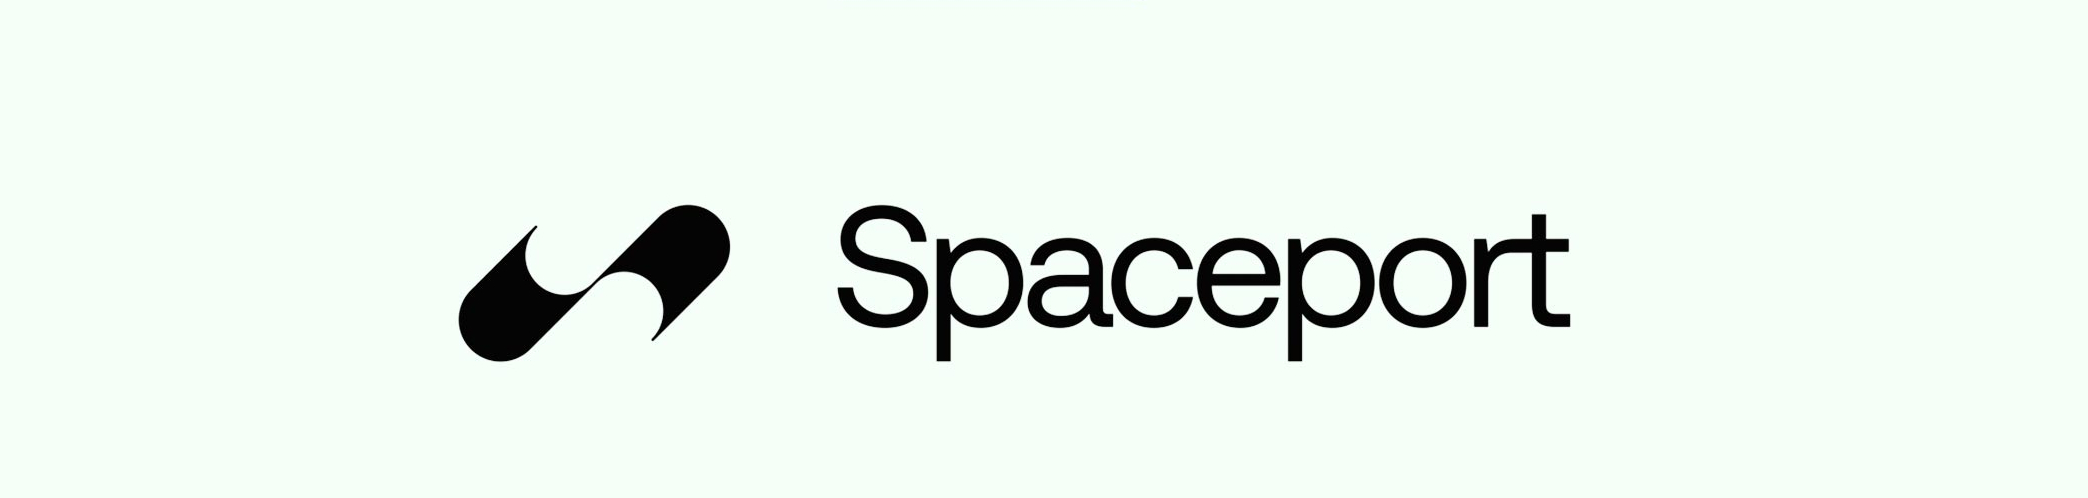 Spaceport, a Web3 licensing protocol, secures $3.6 million in Pre-Seed Funding